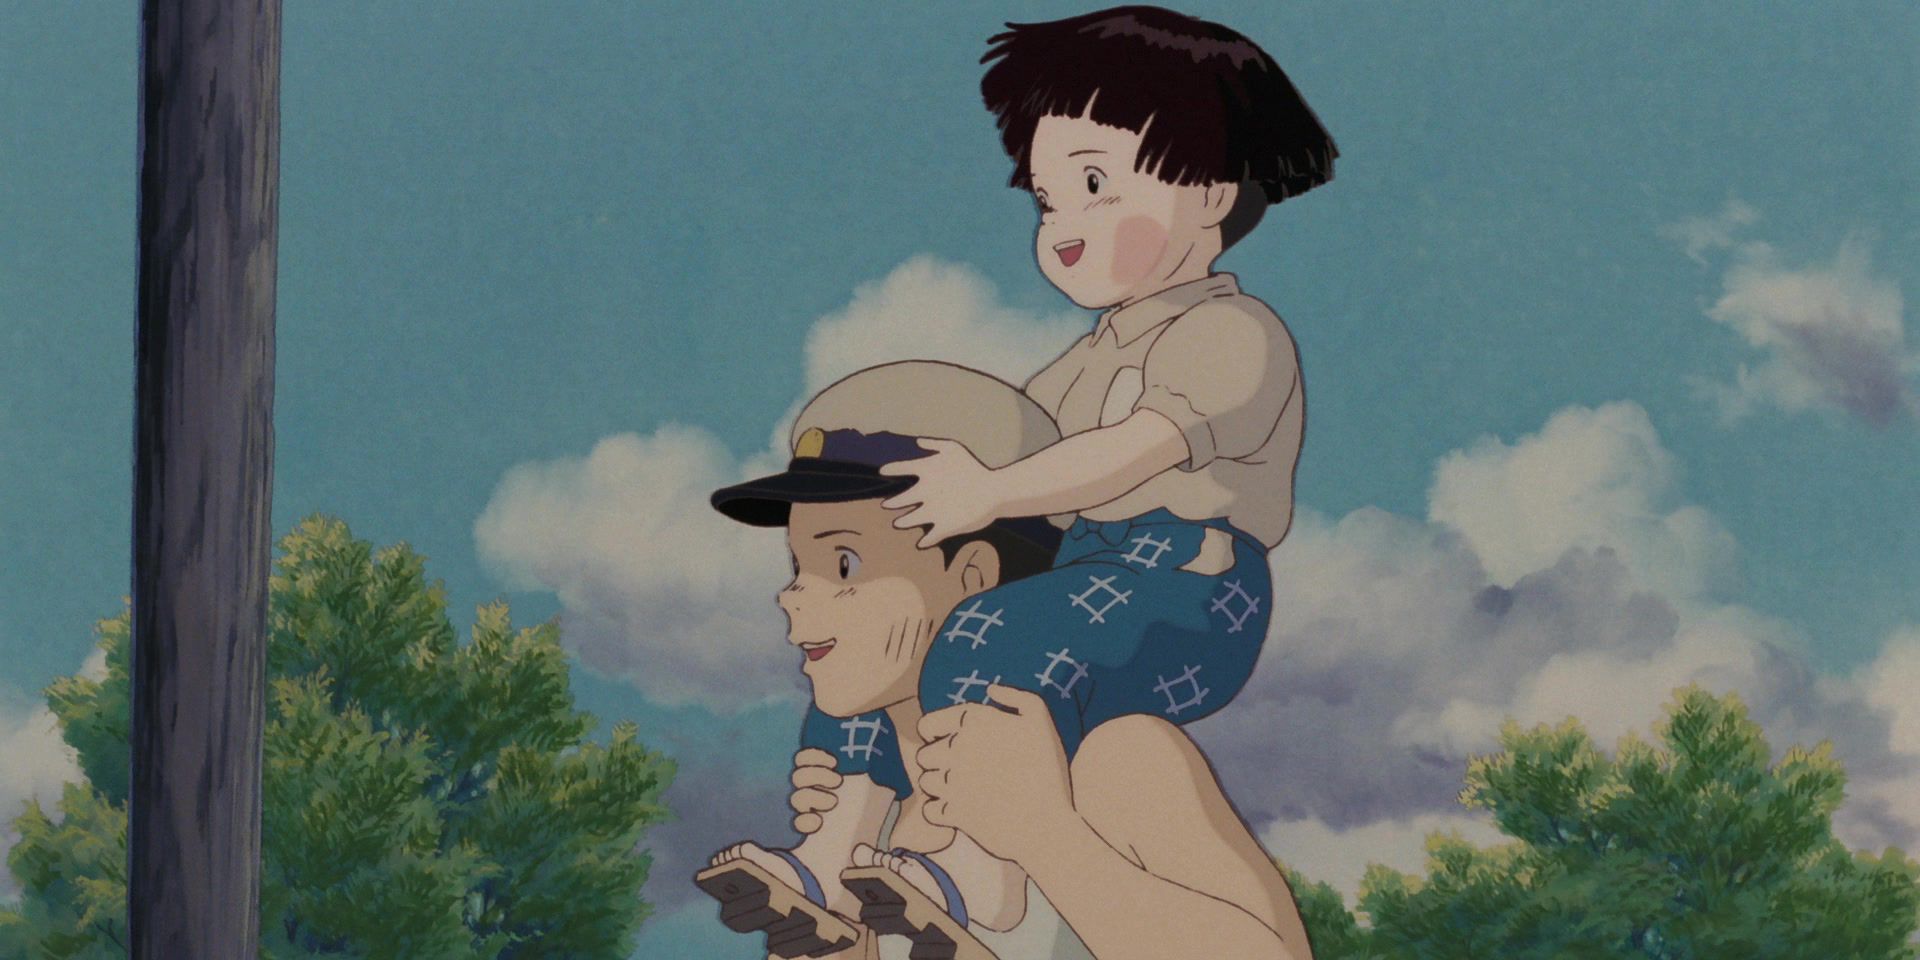 It's Just so Sad!: Grave of the Fireflies